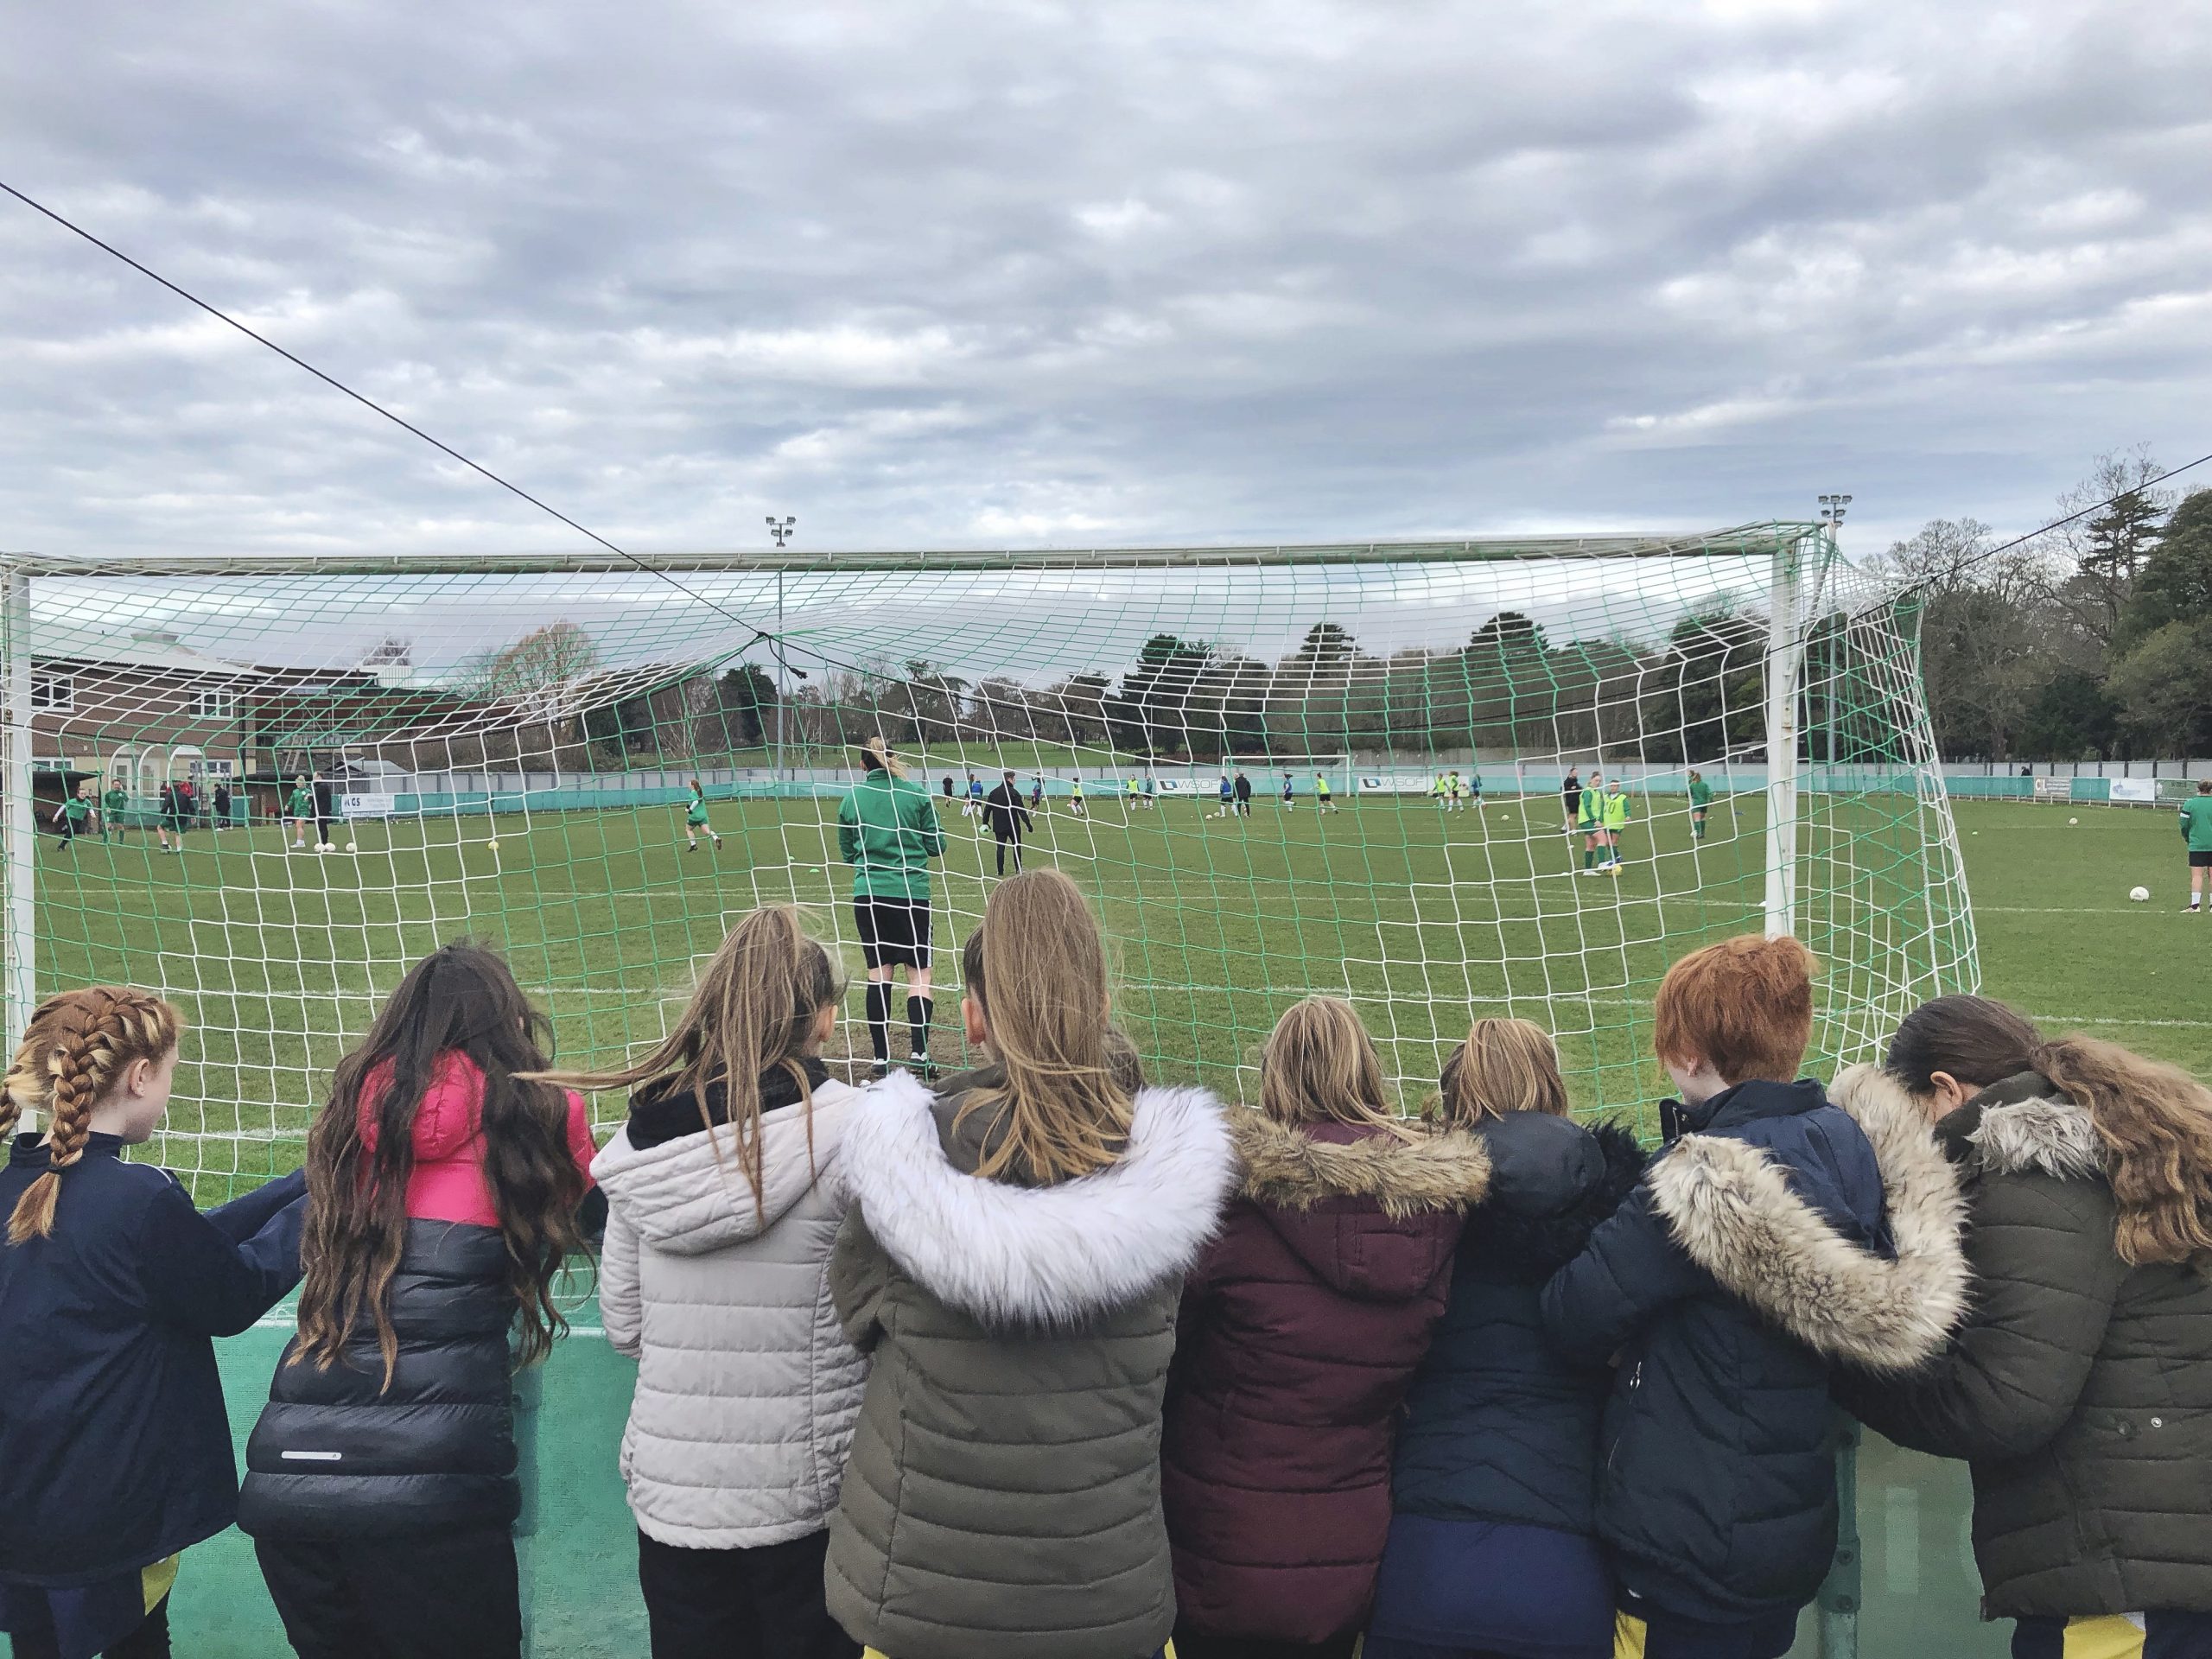 Havant & Waterlooville Girls watch as Chichester City prepare to take on Coventry United.